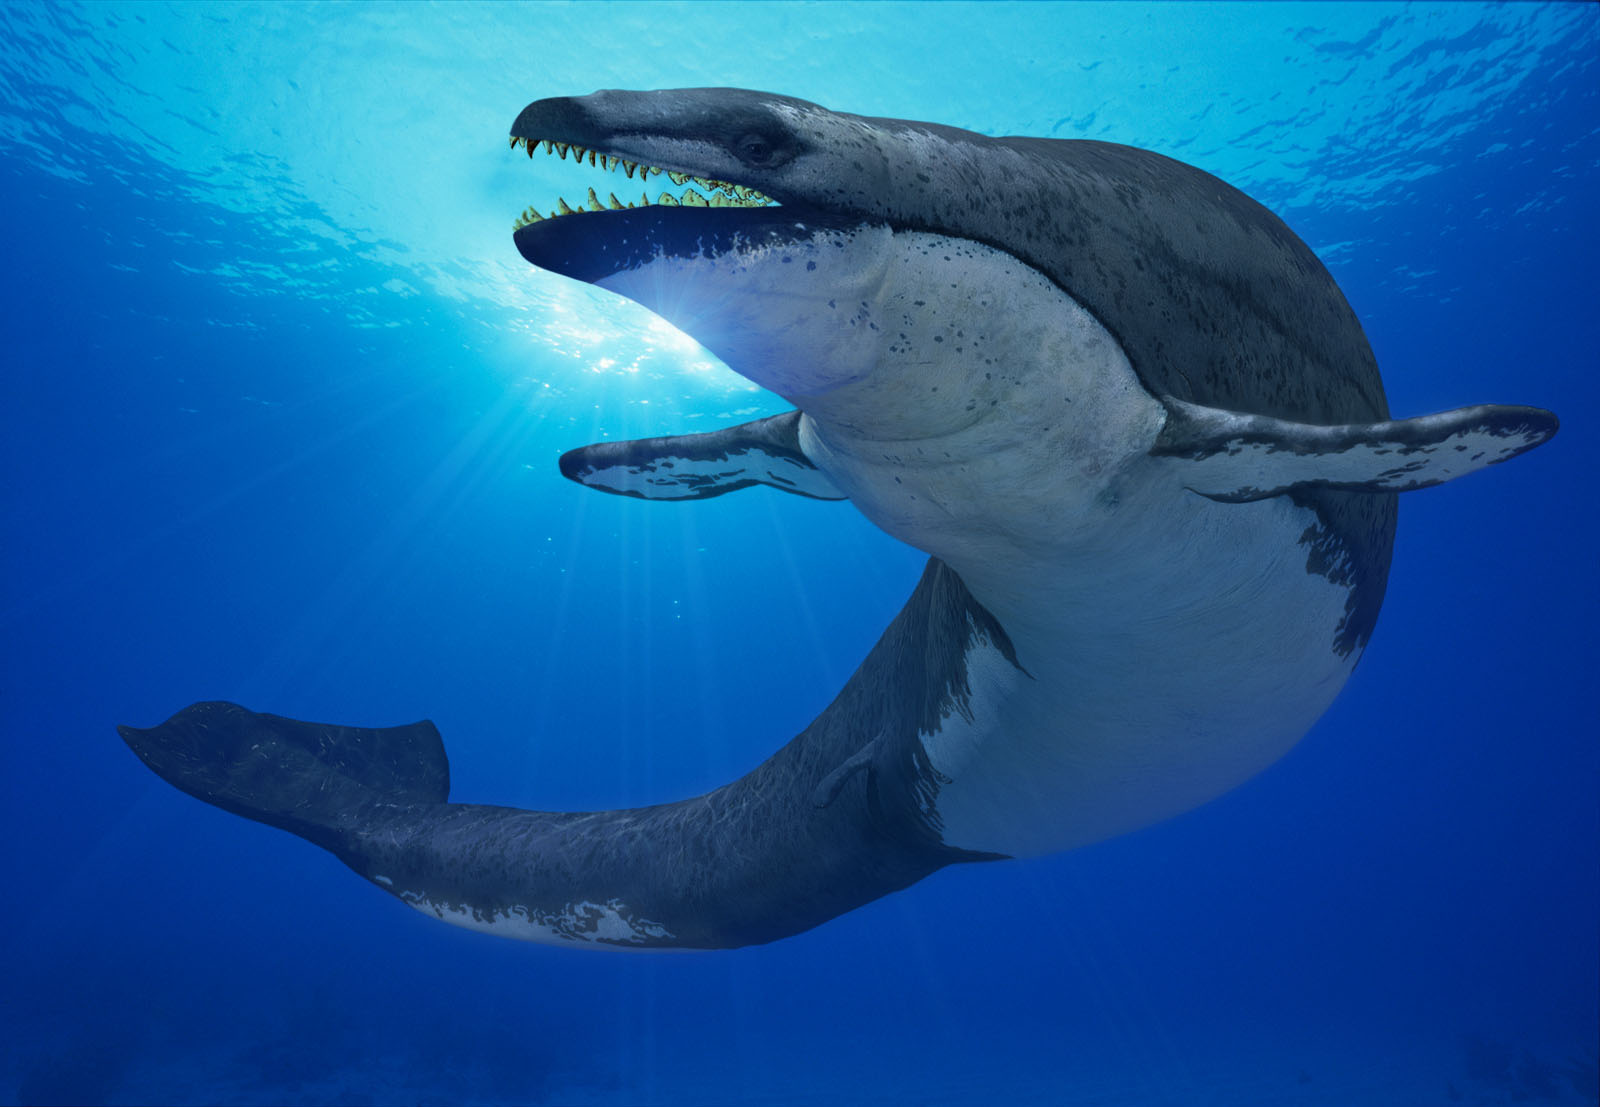 10 Biggest Water Dinosaurs & Sea Monsters Ever Found In Archaeology